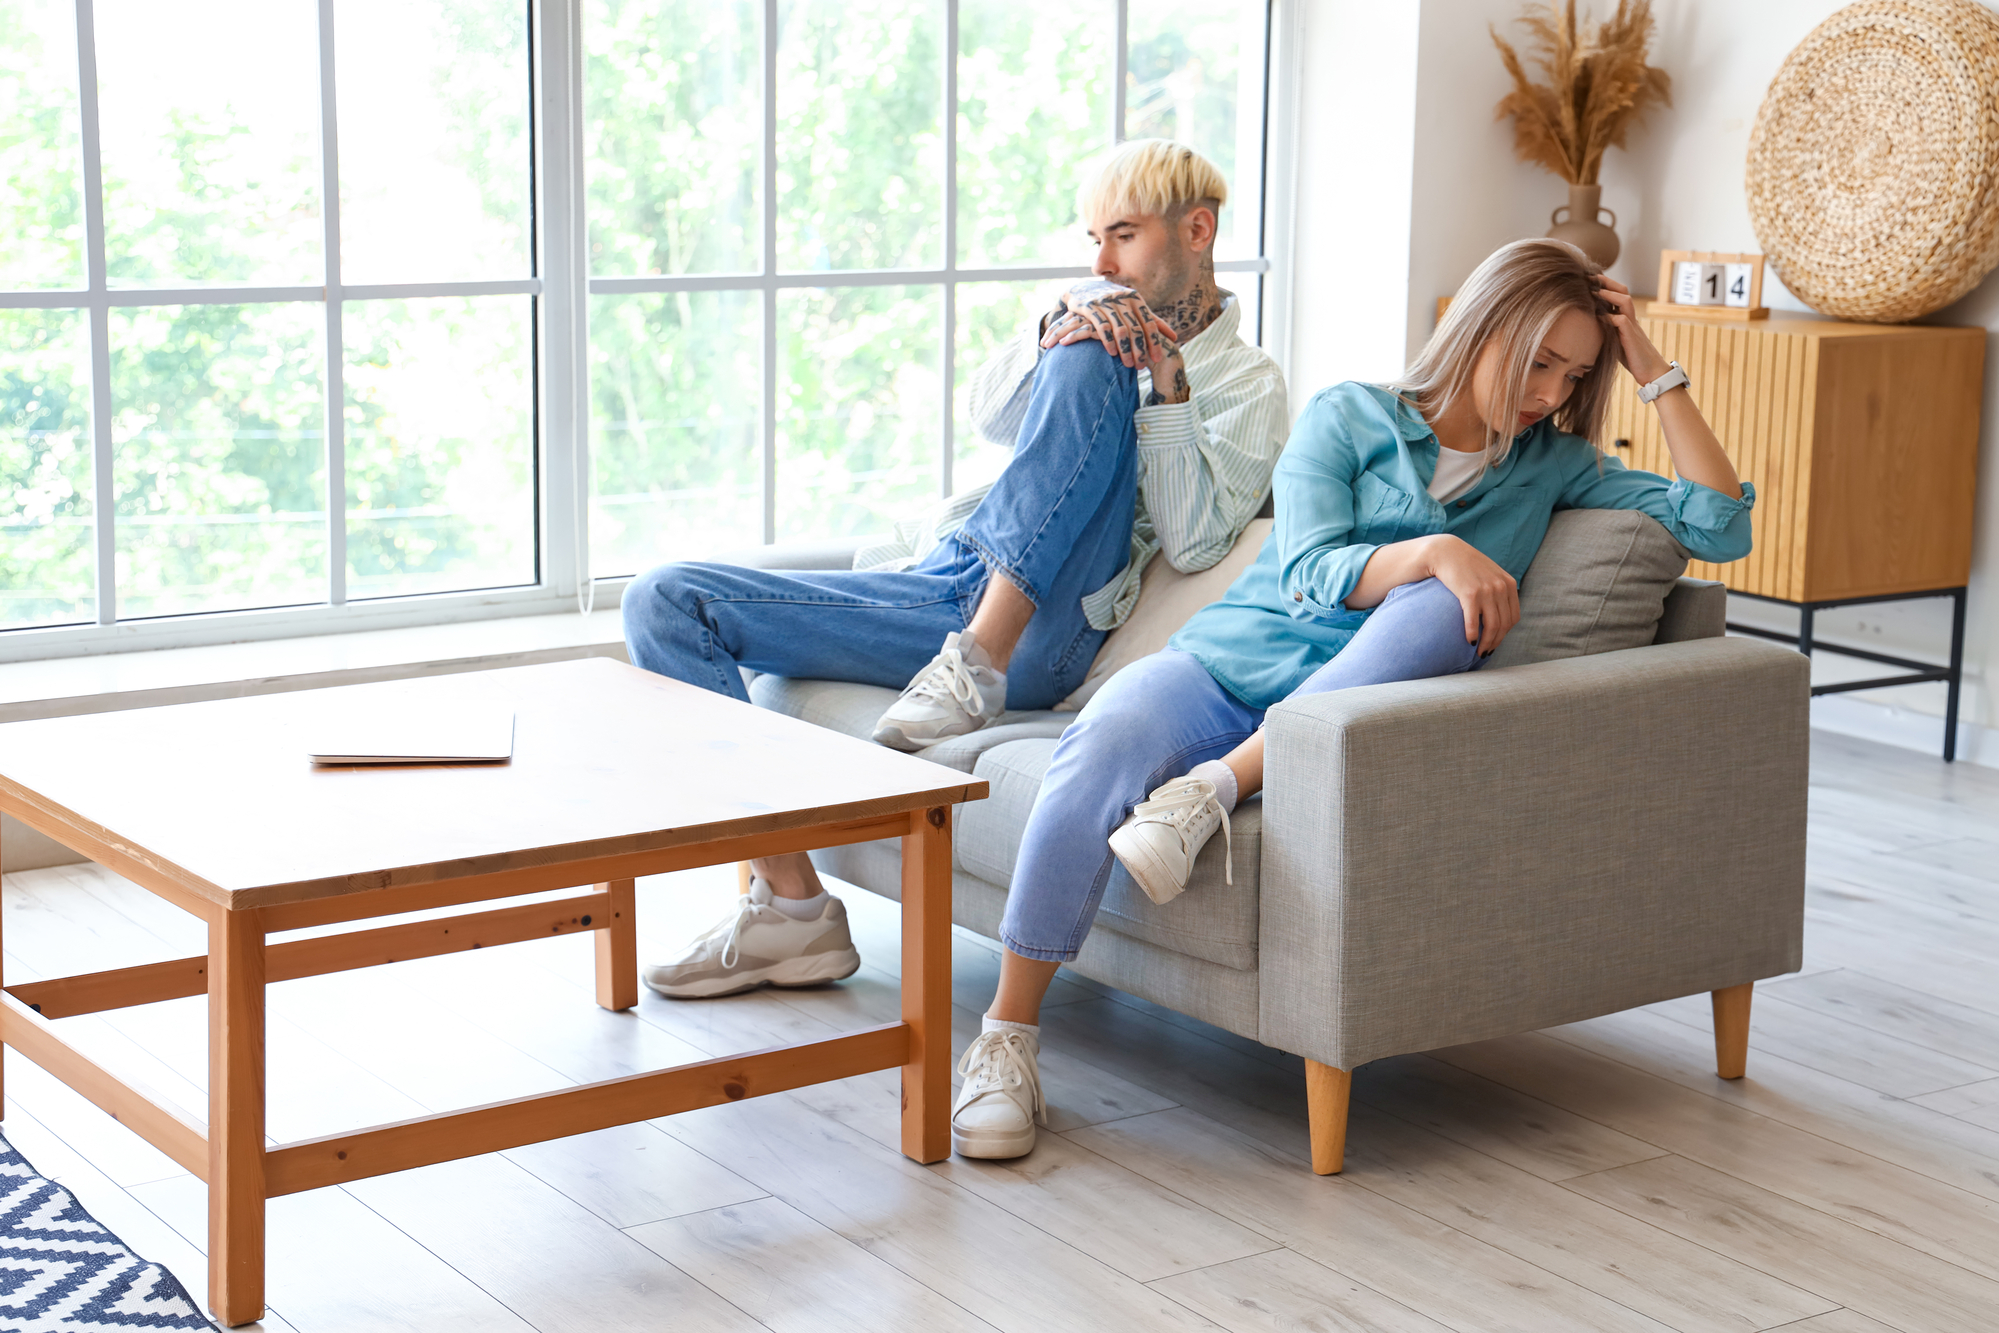 Two people, one with short blond hair and the other with long light hair, sit on a gray couch in a bright room with large windows. They appear upset, with one sitting cross-legged and the other leaning on one arm, looking away. A wooden coffee table is in front of them.